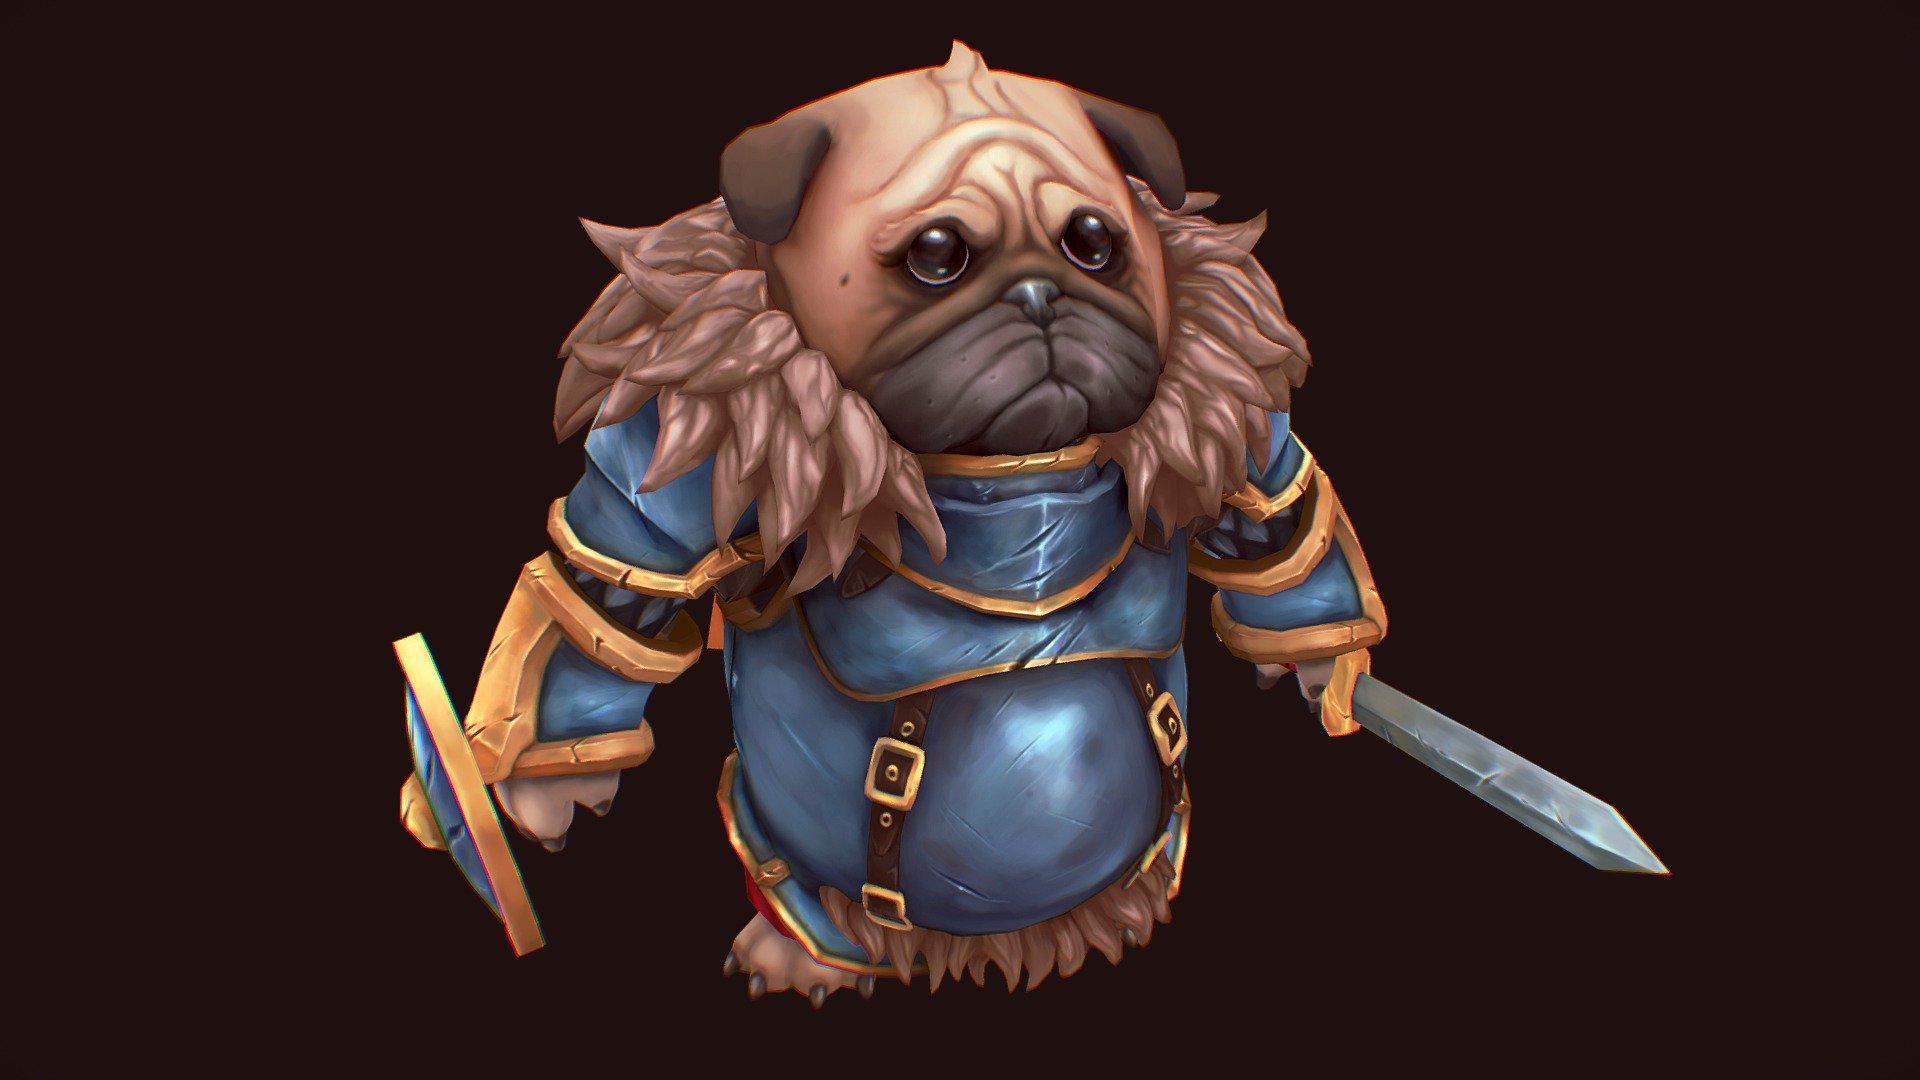 Had fun with this, got a Pug puppy recently and amended a WIP hand painted knight project into Pug Knight :D - Pug Knight - Buy Royalty Free 3D model by Lance (@lancewilkinson) 3d model